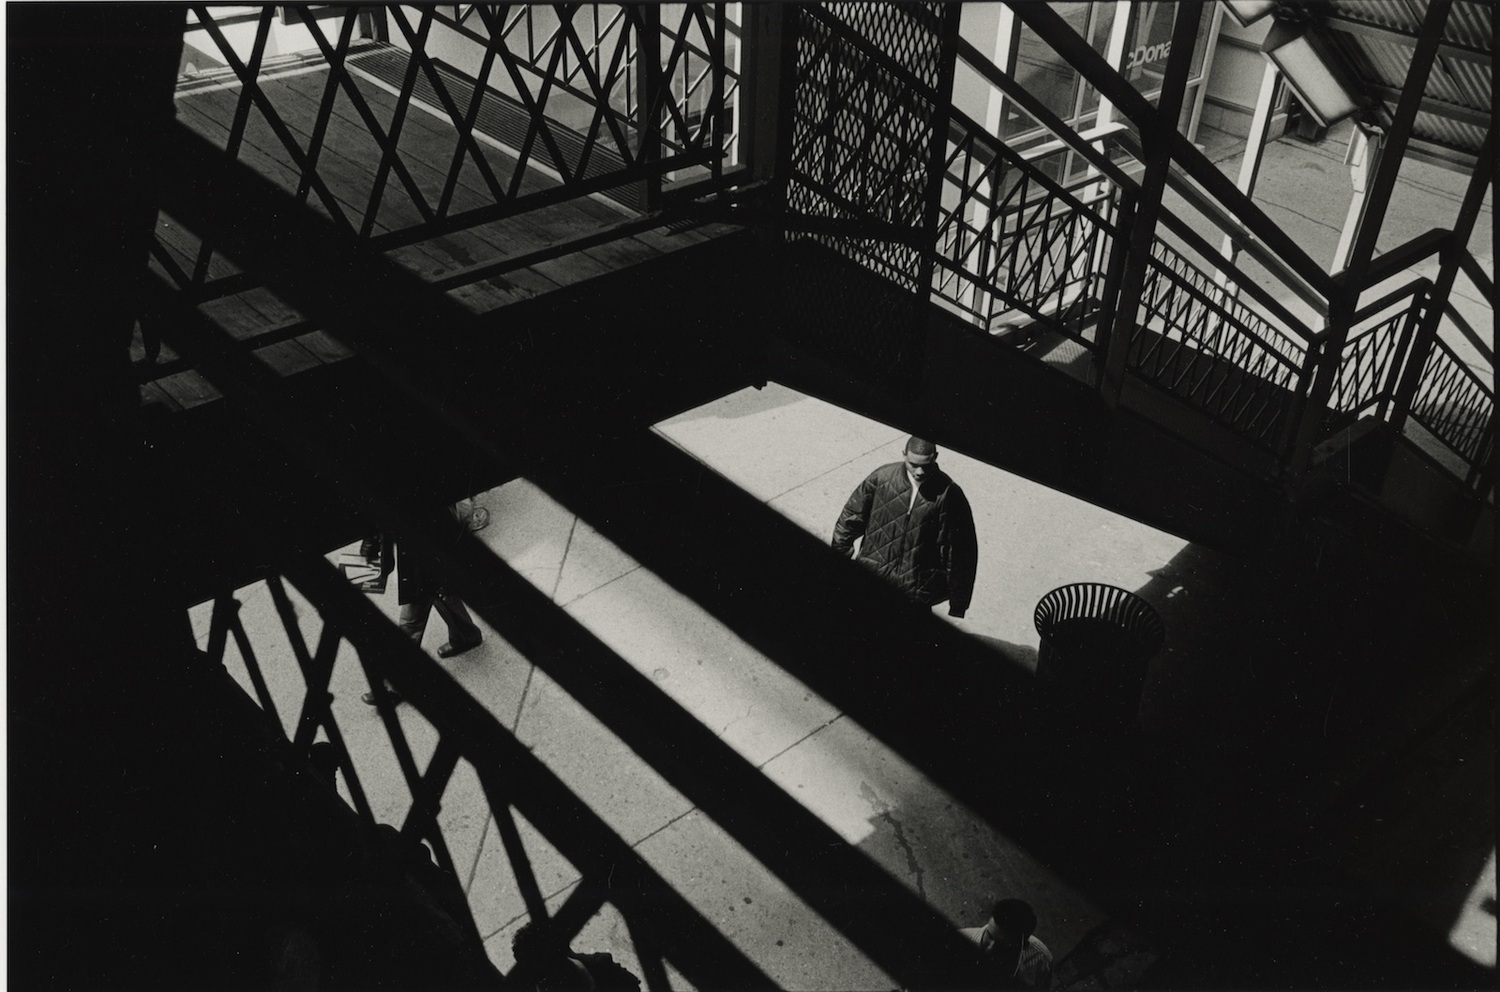 Man in a jacket, Looking down from L platform, Chicago, 2003